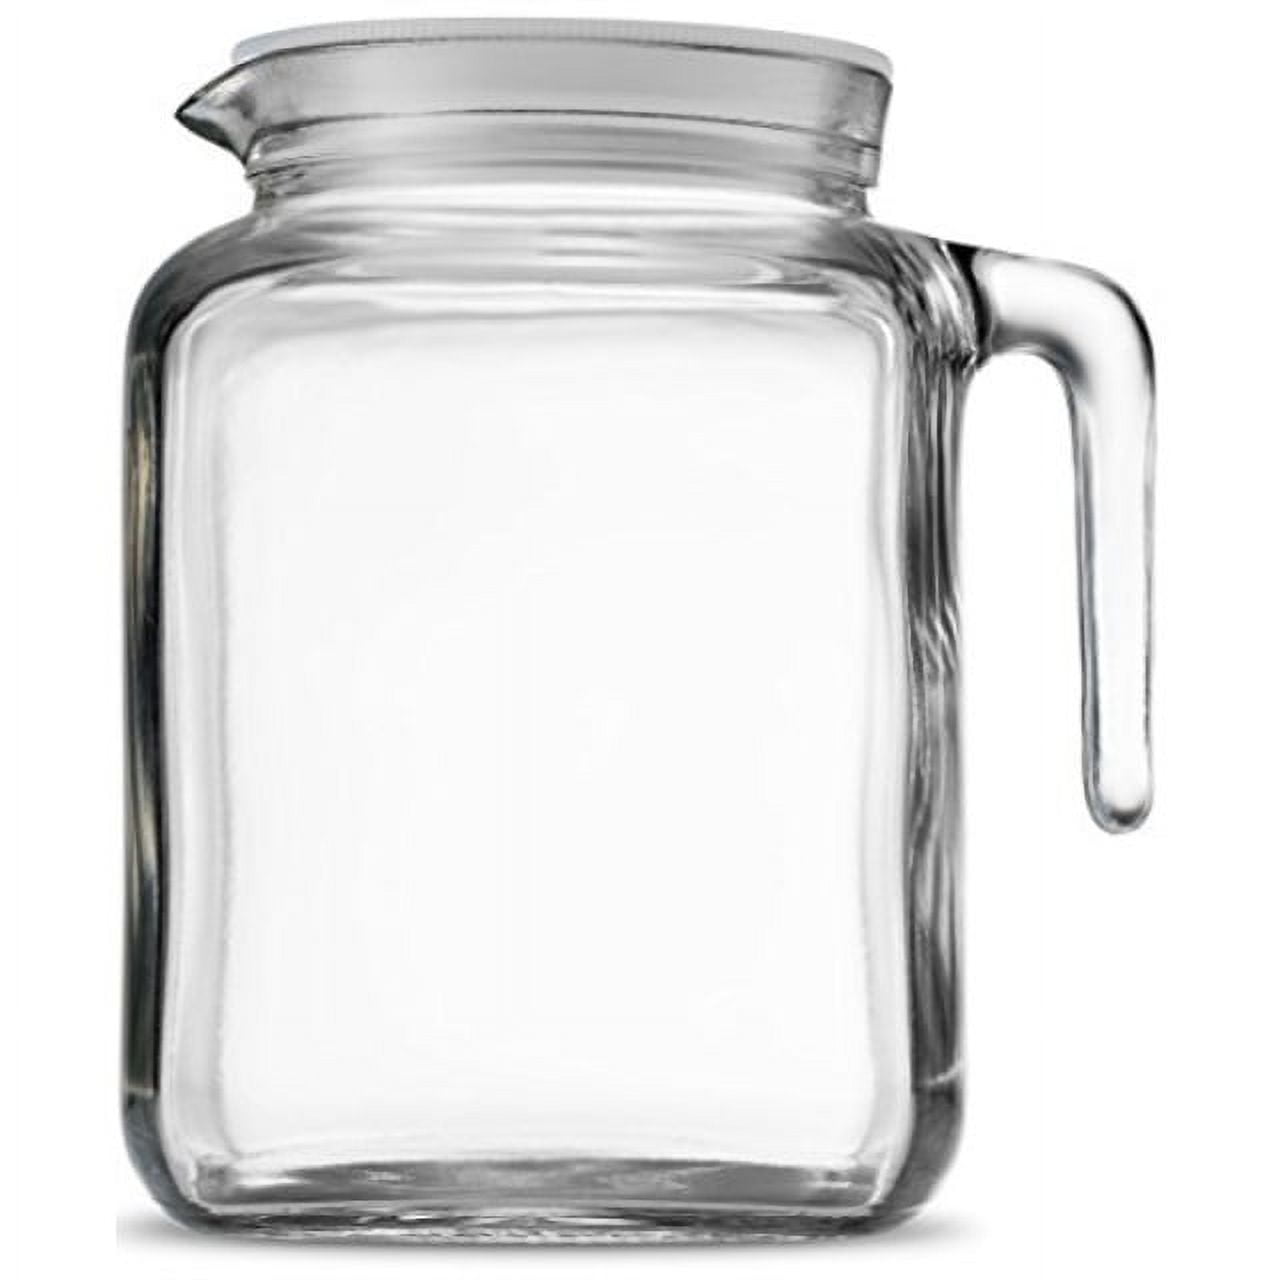 Bormioli Rocco Hermetic Seal Glass Pitcher With Lid and Spout 68 Ounce